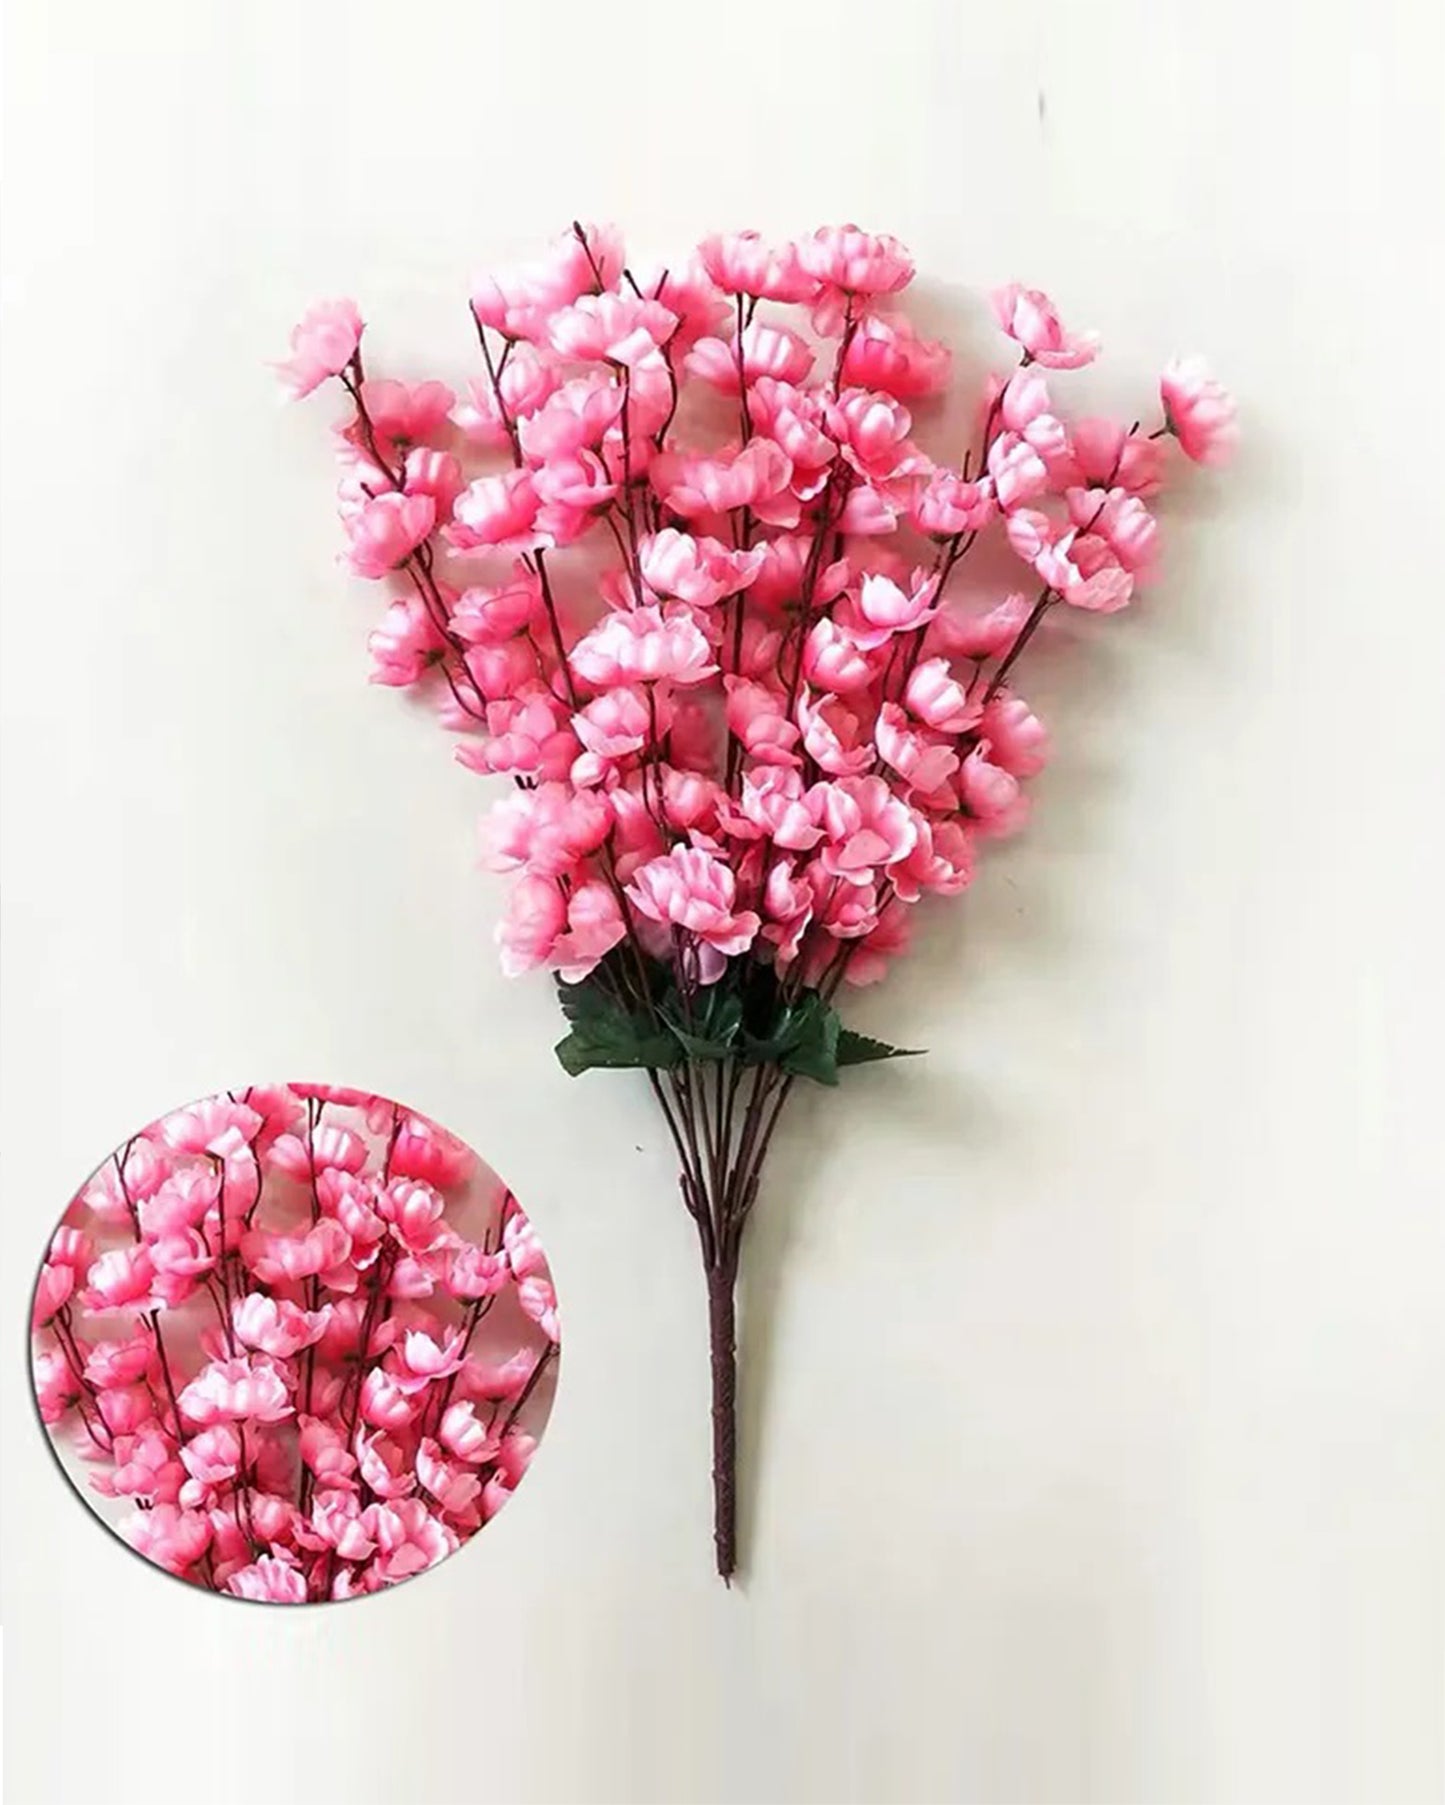 Artificial Peach Blossom Flower Bunch for Vase UV Resistant Fake Shrubs Greenery Bushes Bouquet to Brighten Home Kitchen Garden Indoor Outdoor Decor, 2 bunches - 22inch/55cm, Red